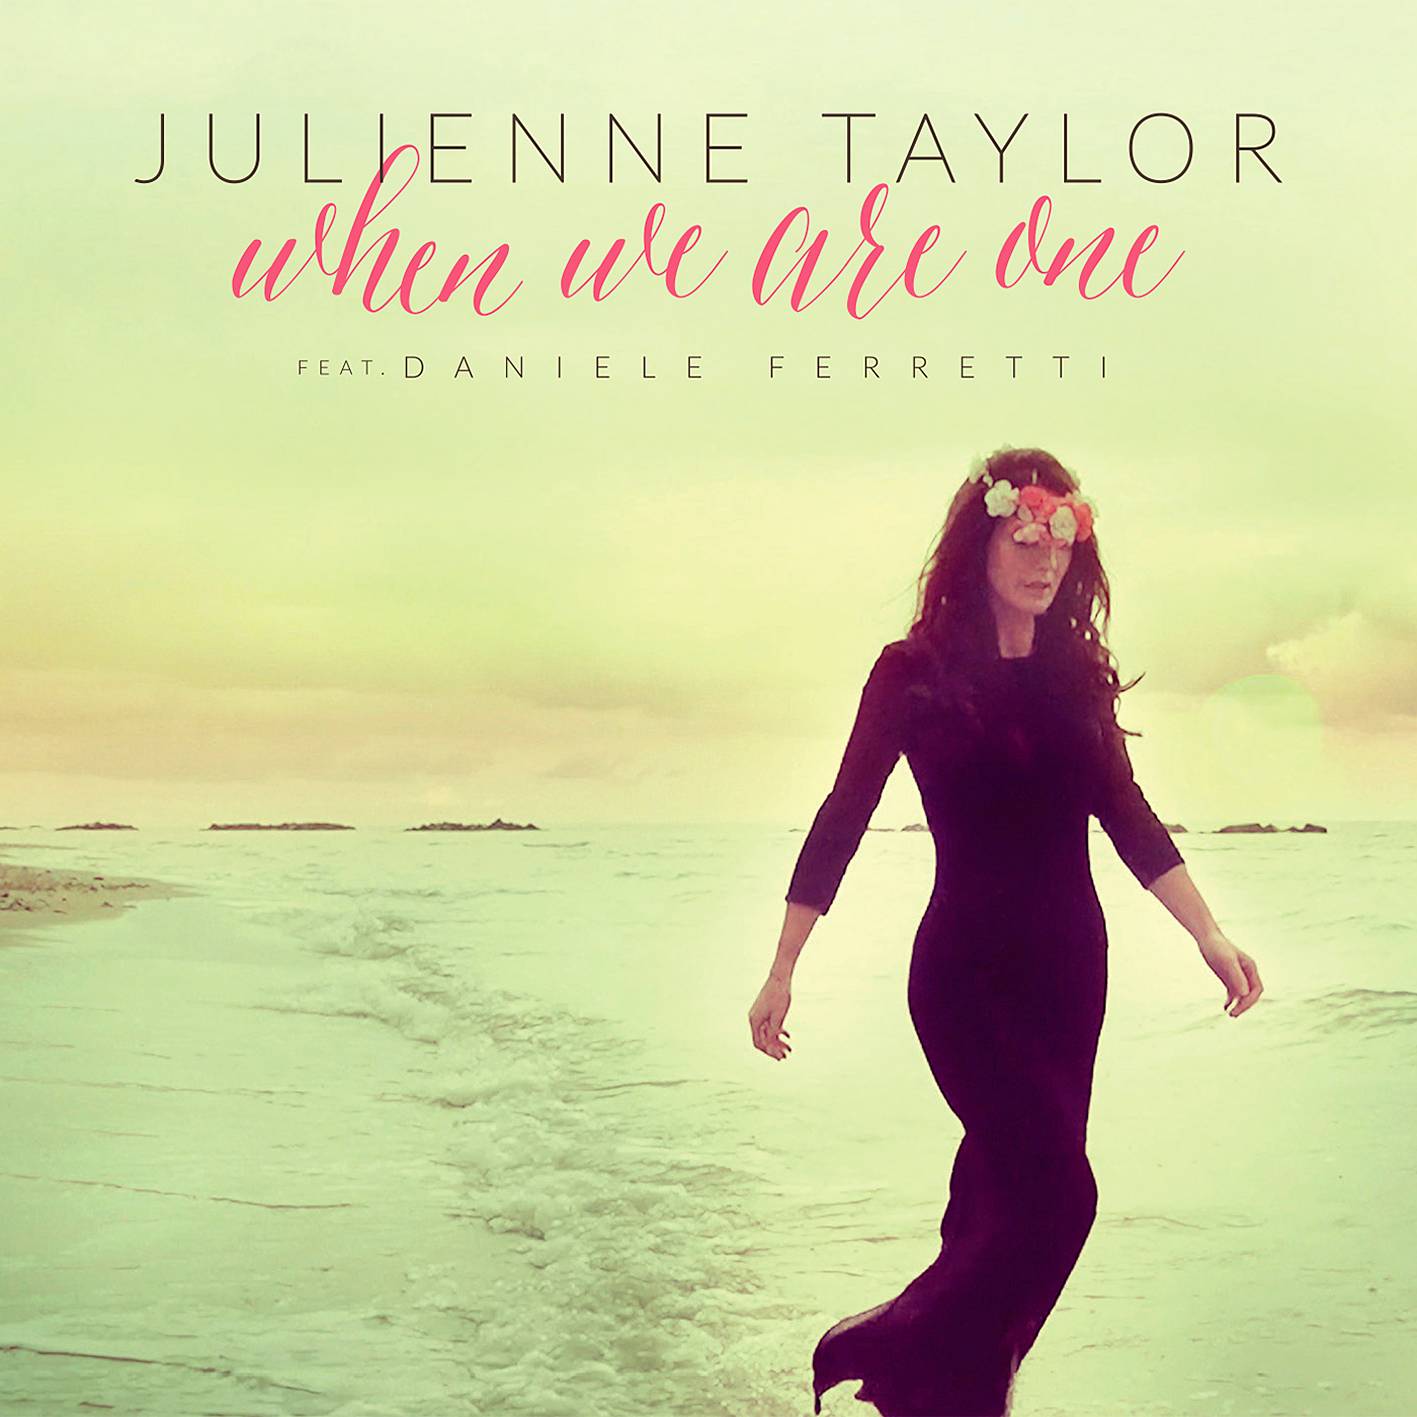 Julienne Taylor – When We Are One (2016) SACD ISO + Hi-Res FLAC